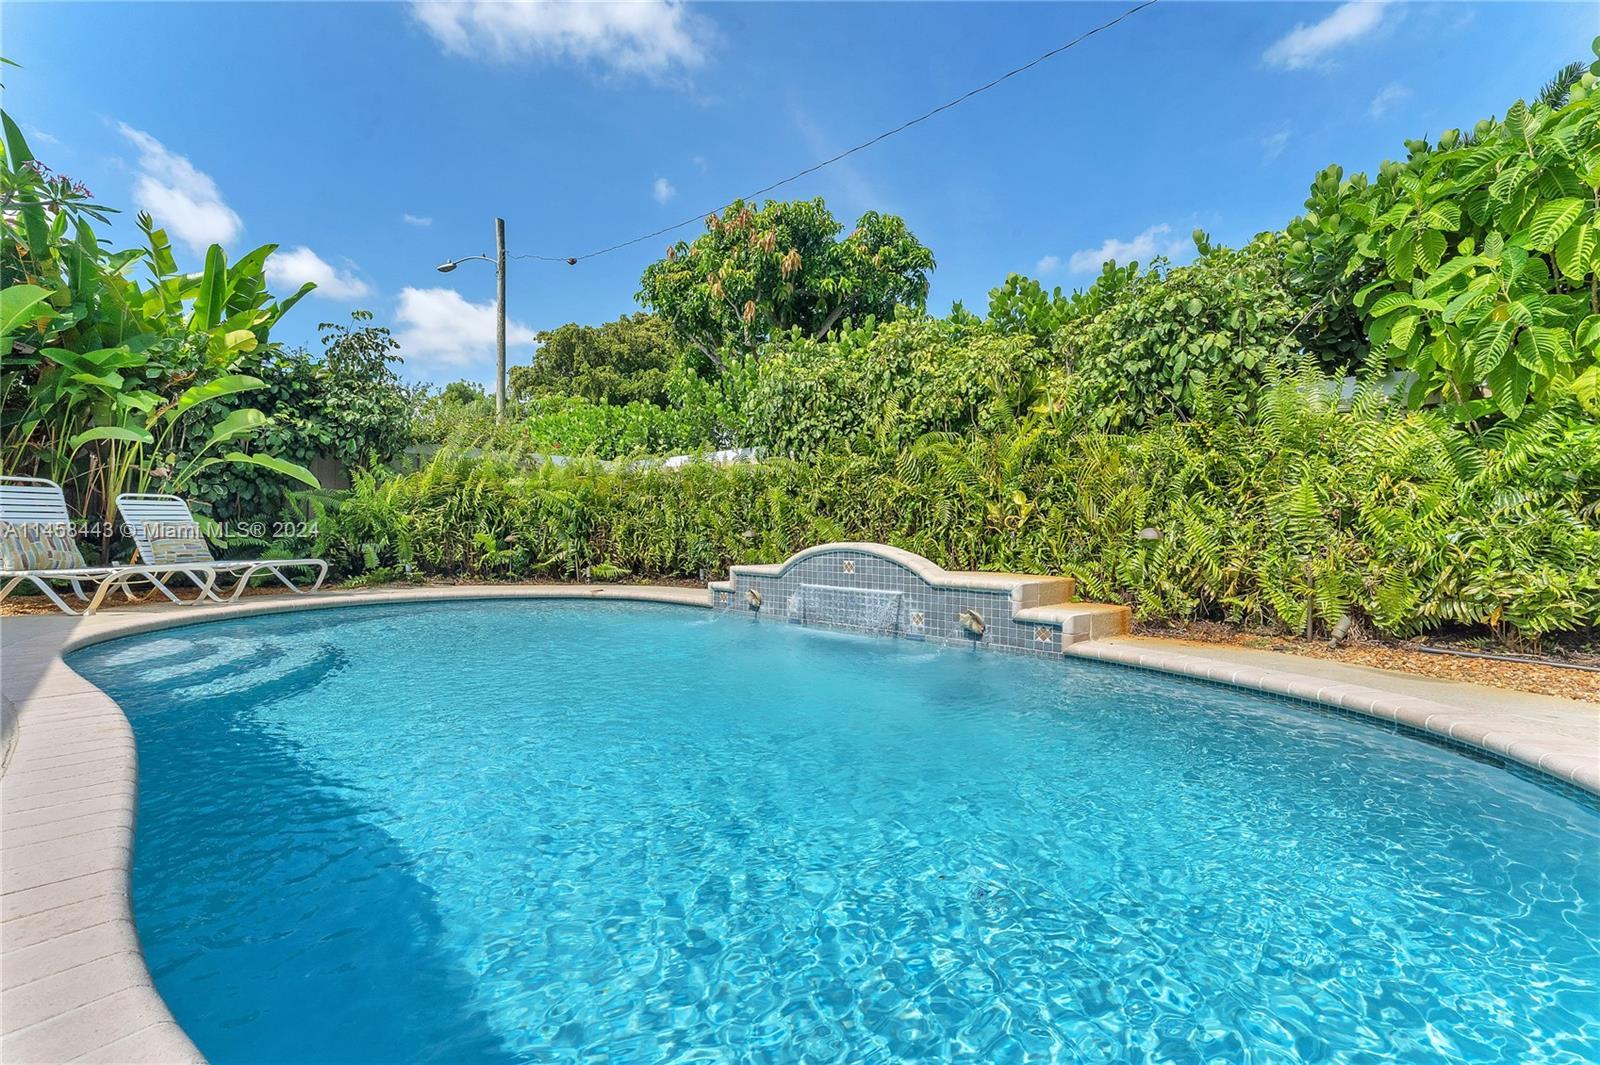 Situated in the heart of WILTON MANORS on a large CORNER LOT. Close to downtown Ft Lauderdale & the 